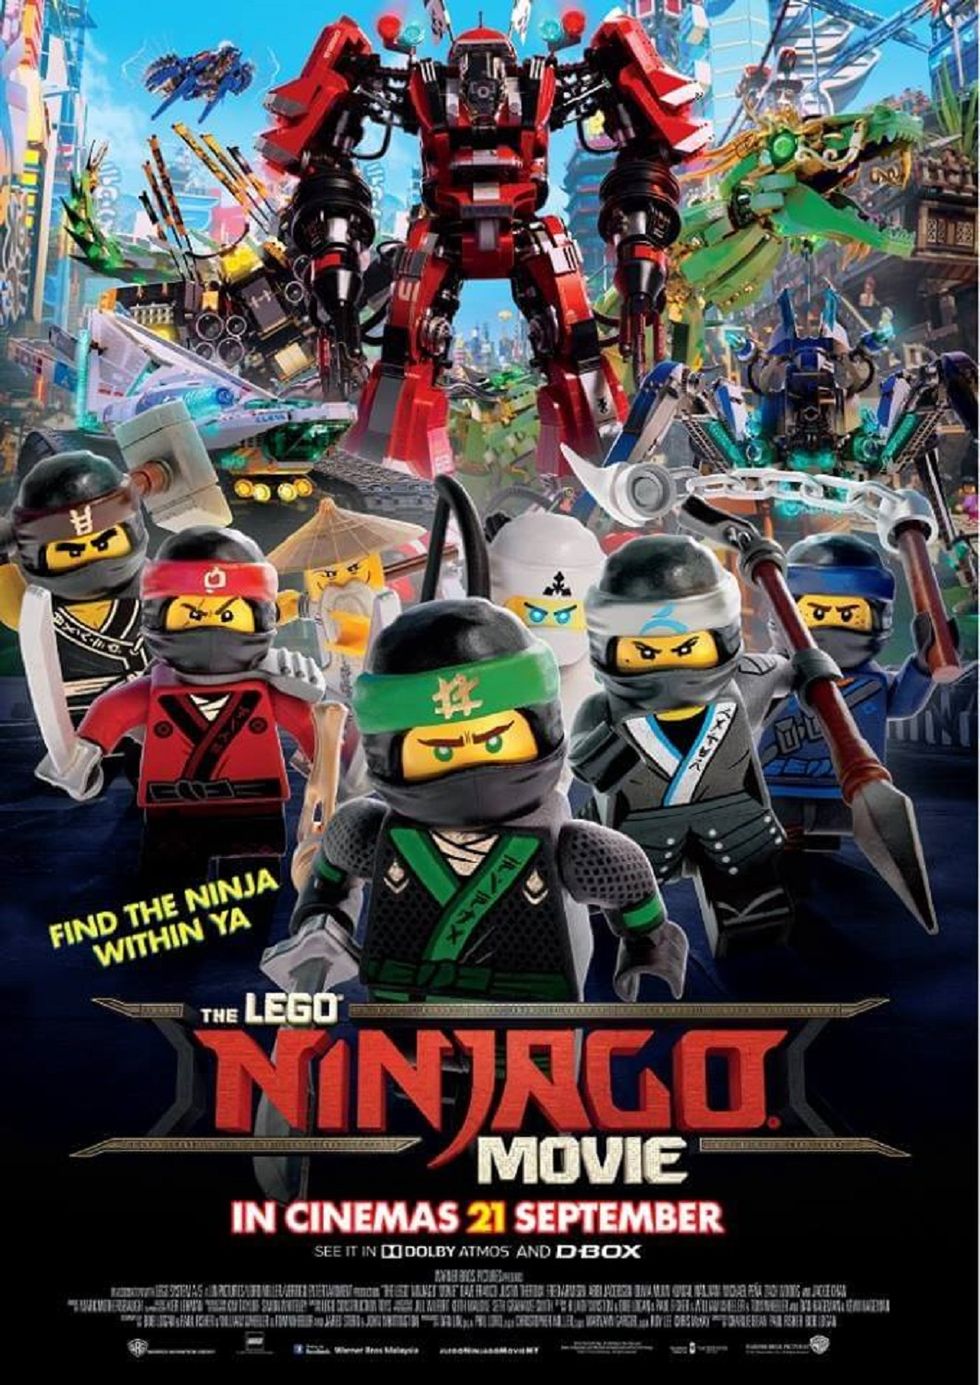 LEGO Ninjago: From The Small Screen To The Big Screen